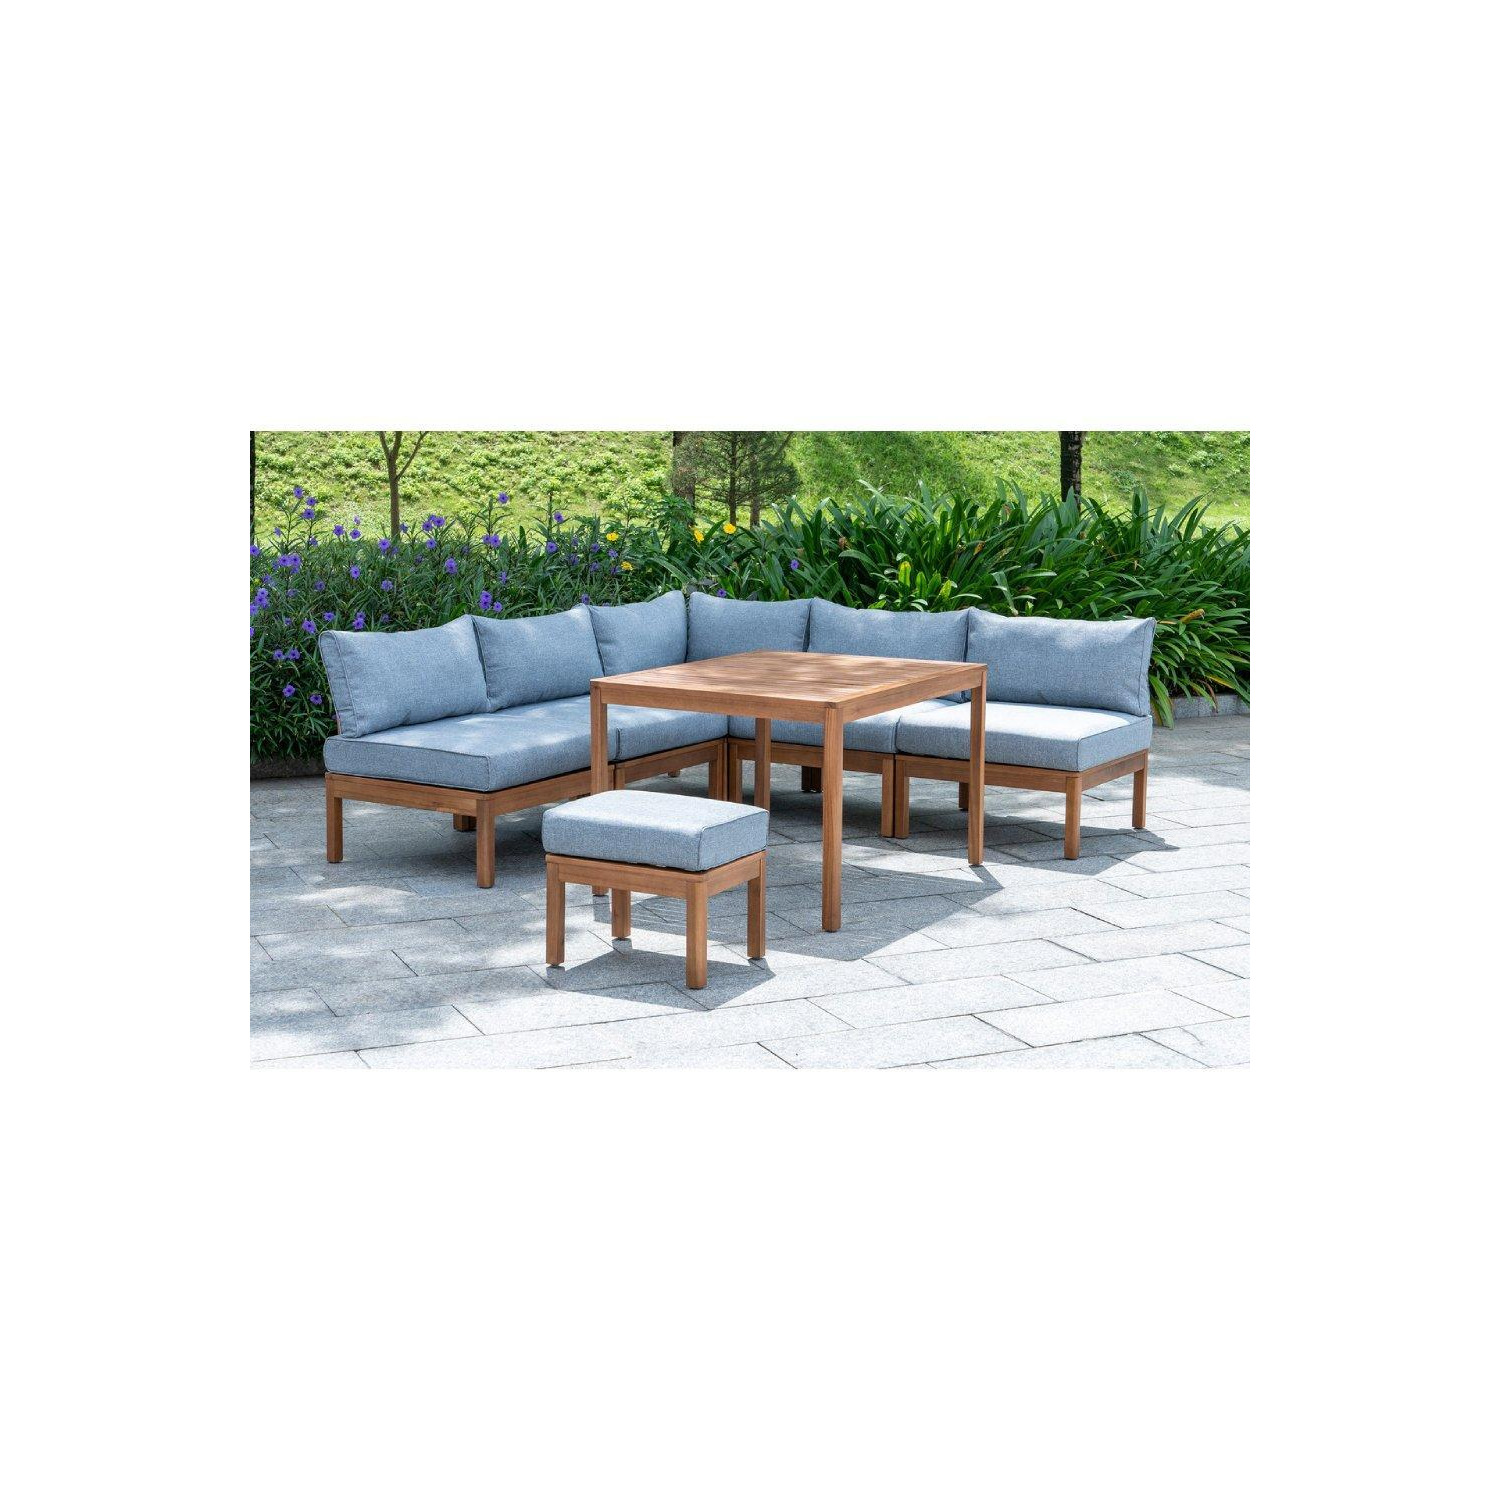 Cali - Wooden Garden Lounge Set with Stool - 6 Seats - image 1